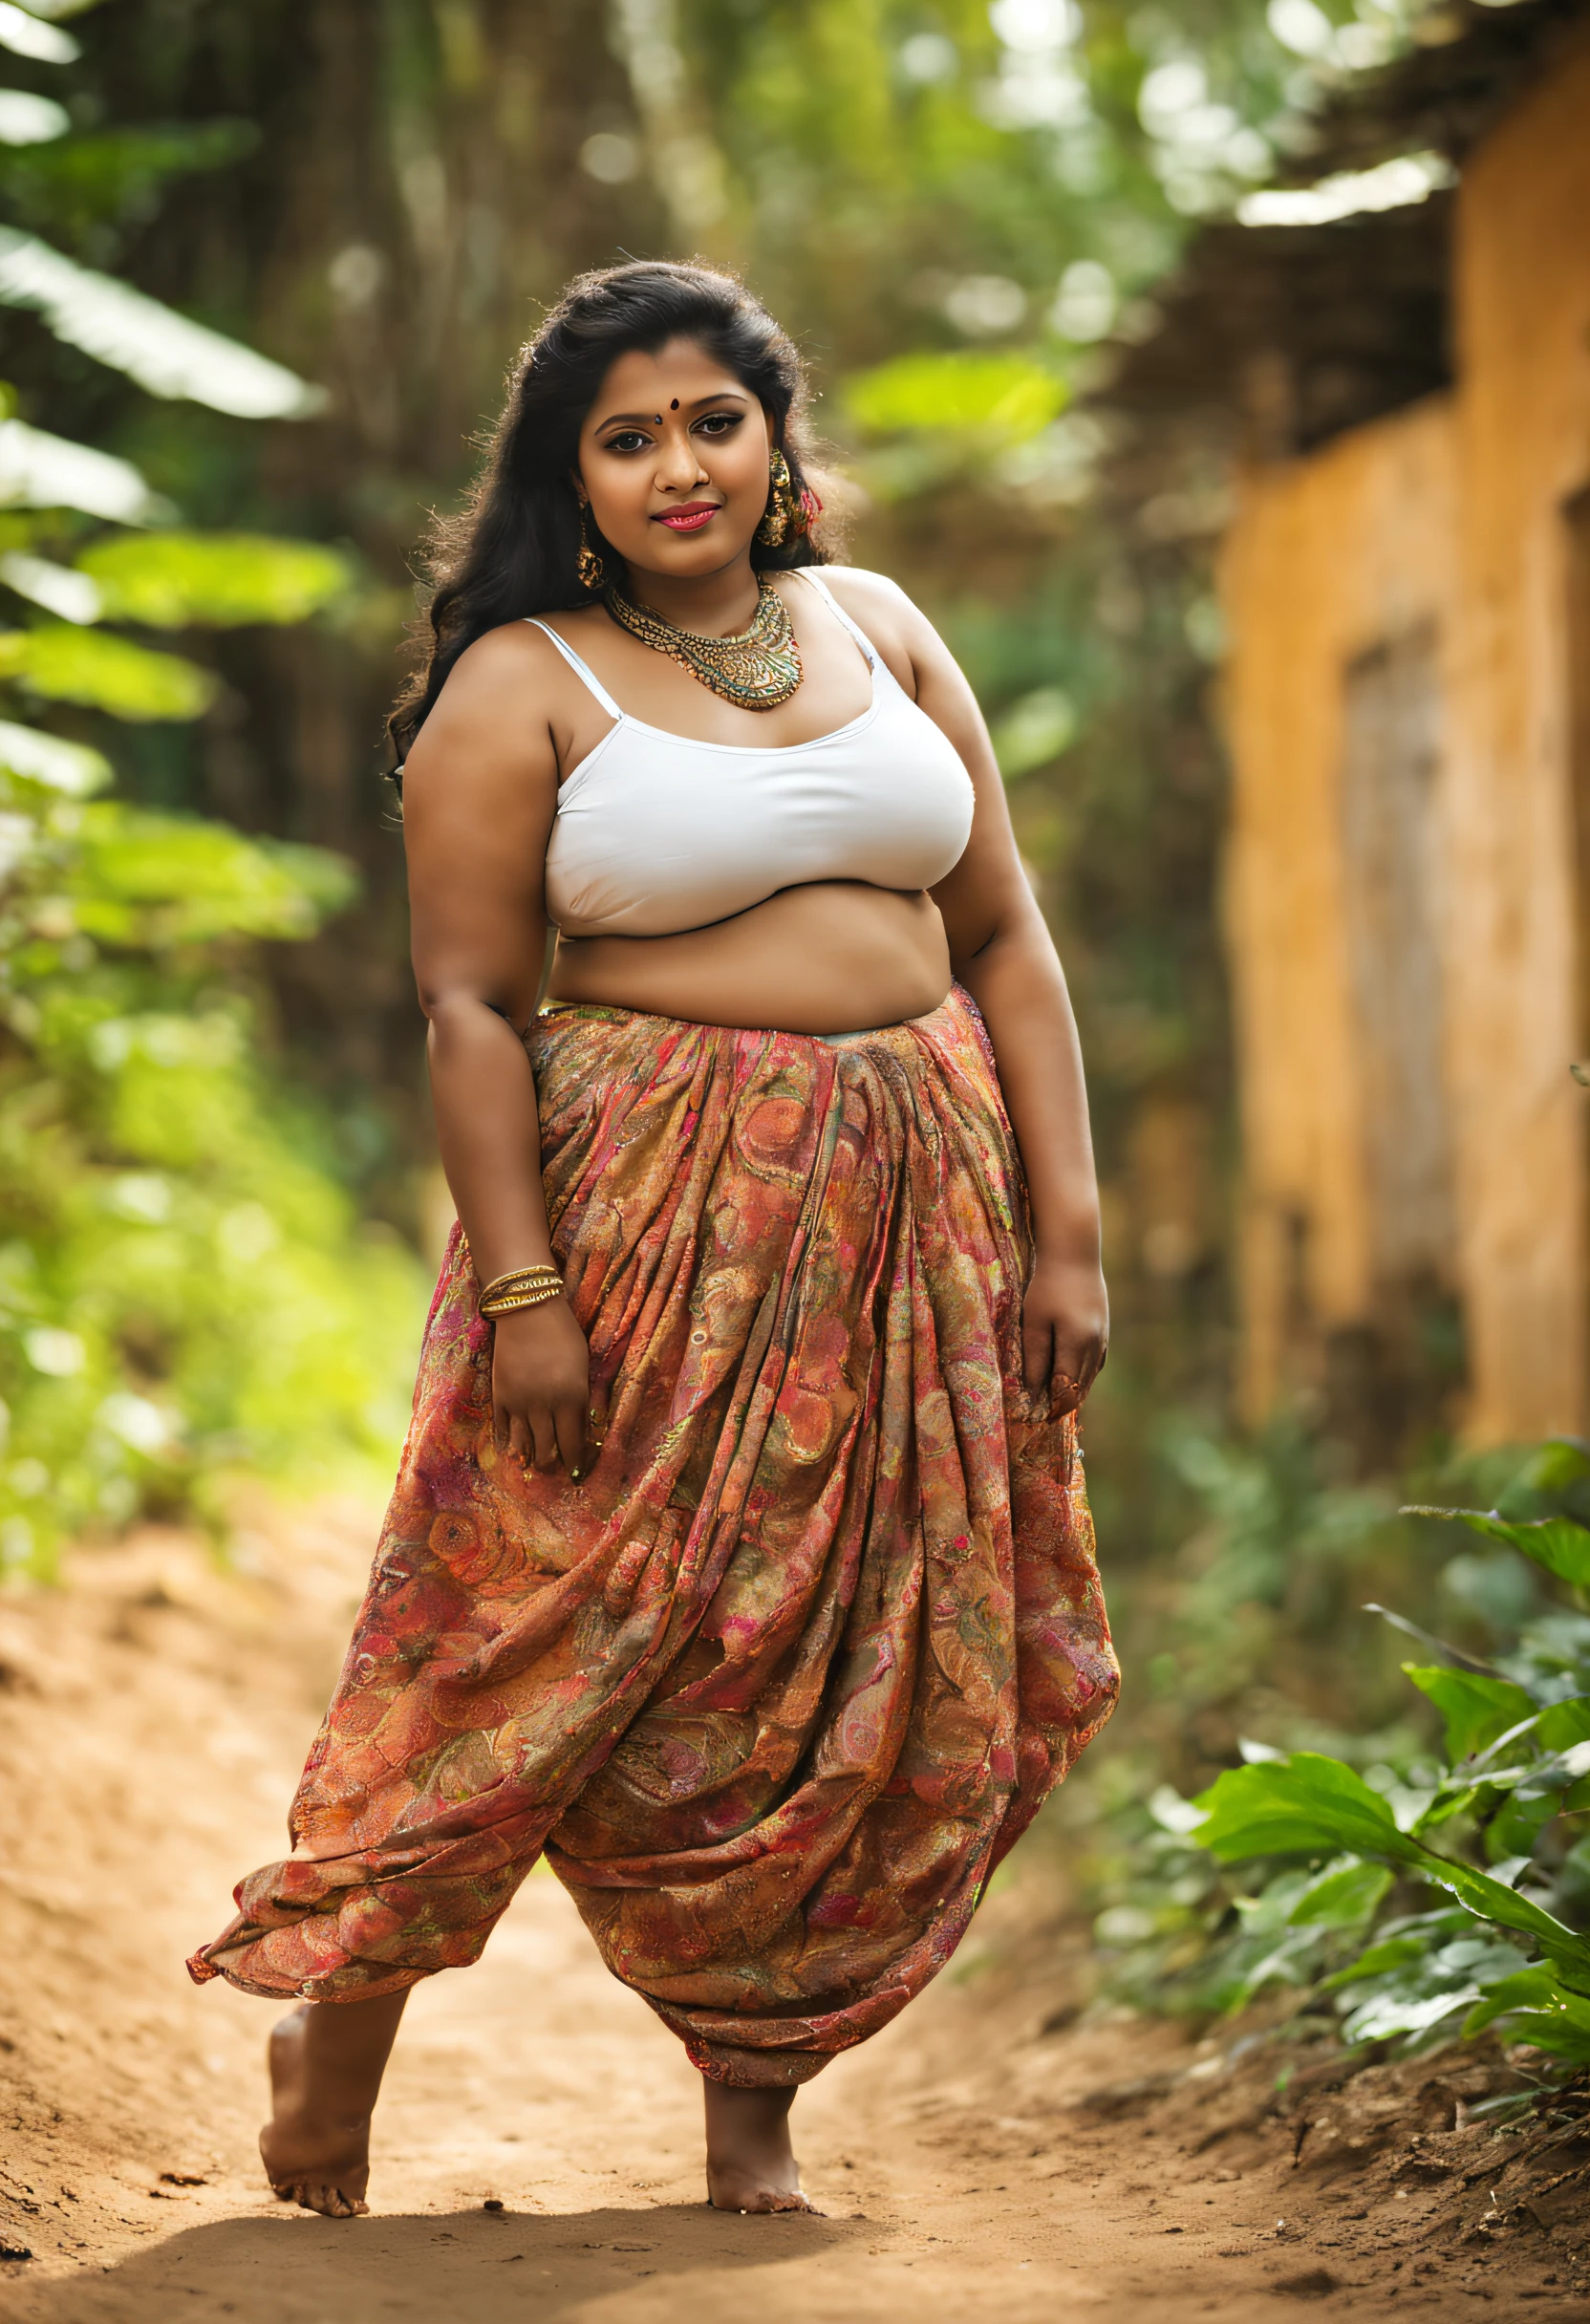 Photo of a kerala village girl, 25 years old,hottest, ((((plus size fashion week outdoor fashion photoshoot))), thunder thigh, kerala ethnic tradional fashion, (((tall body : 2.5))) (((( plus size )))) ((( big busty jut, large breast: 1.9))), clear face, (((show deep navel))), full body, glamourous, daylight, r4w photo, masterpiece, ((((Extremely Realistic)))), Realism, Raw photo, Photography, High detailed , photorealistic, shot on sony vanice camera,(((black Skin : 0.8))),Long Legs and Hot Body,aw0k euphoric style